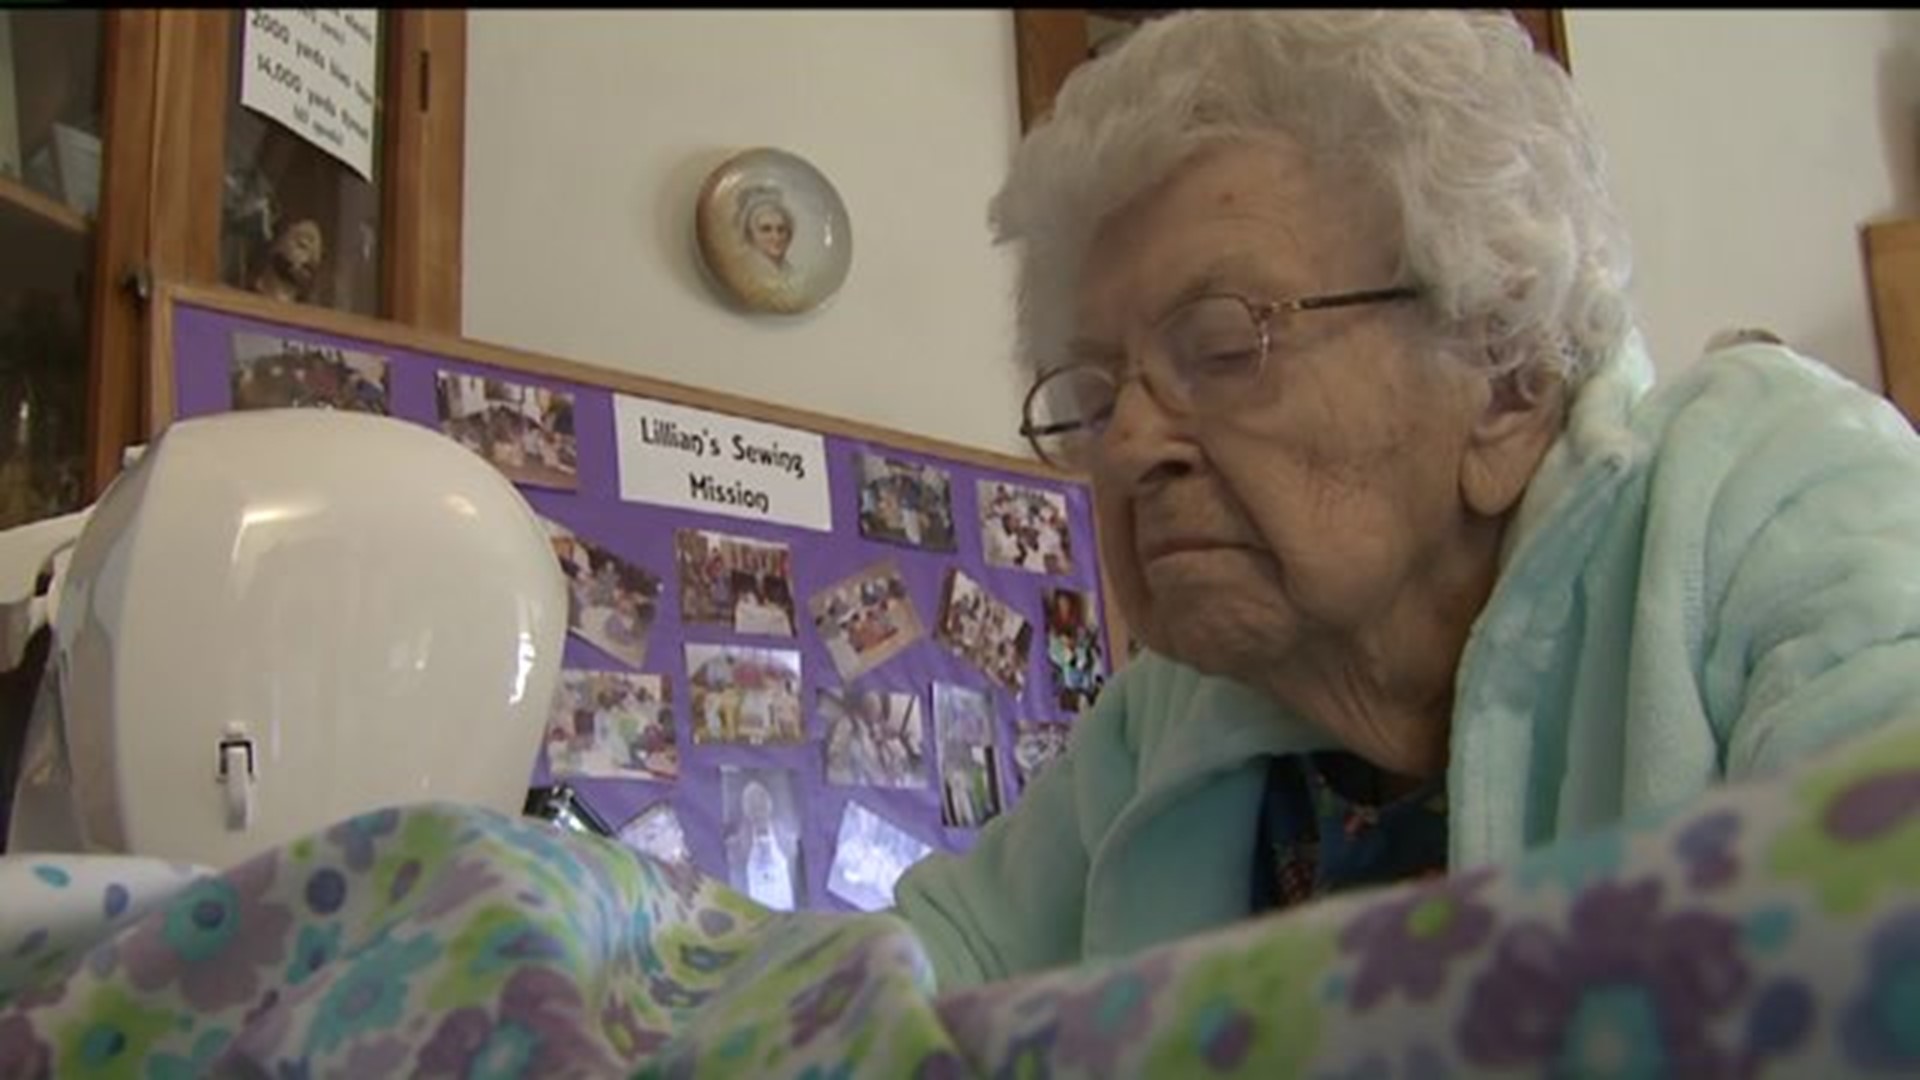 Nearly 100-year-old woman reaches another major milestone